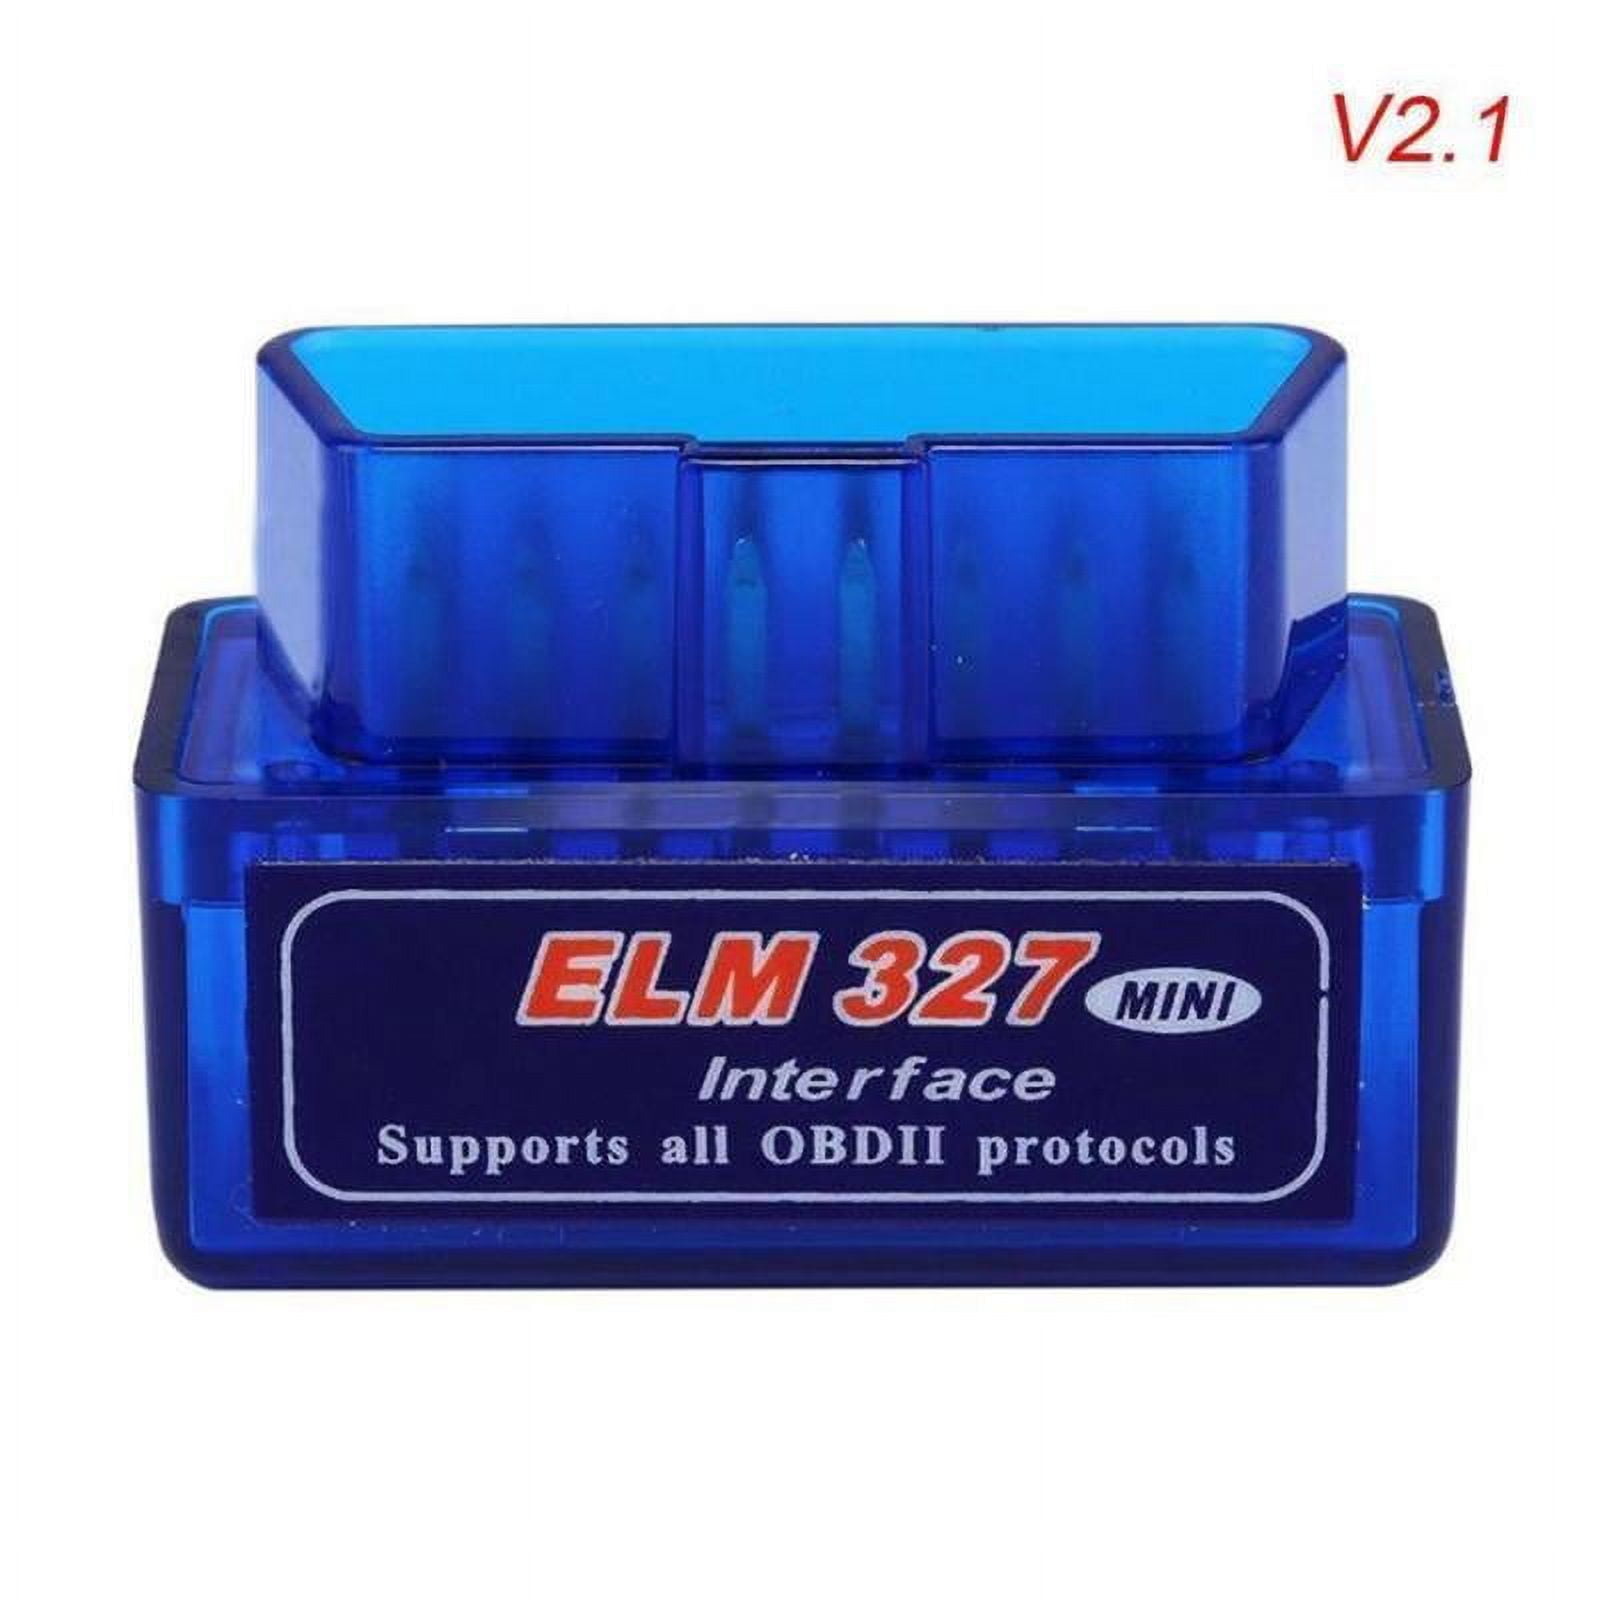 Elm327 Bluetooth V1.5 Chip Pic25K80 OBD2 Adapter for Android/PC Auto  Diagnostic Tool Elm 327 V1.5 for Full Obdii Function - China Elm327, OBD2  Scanner